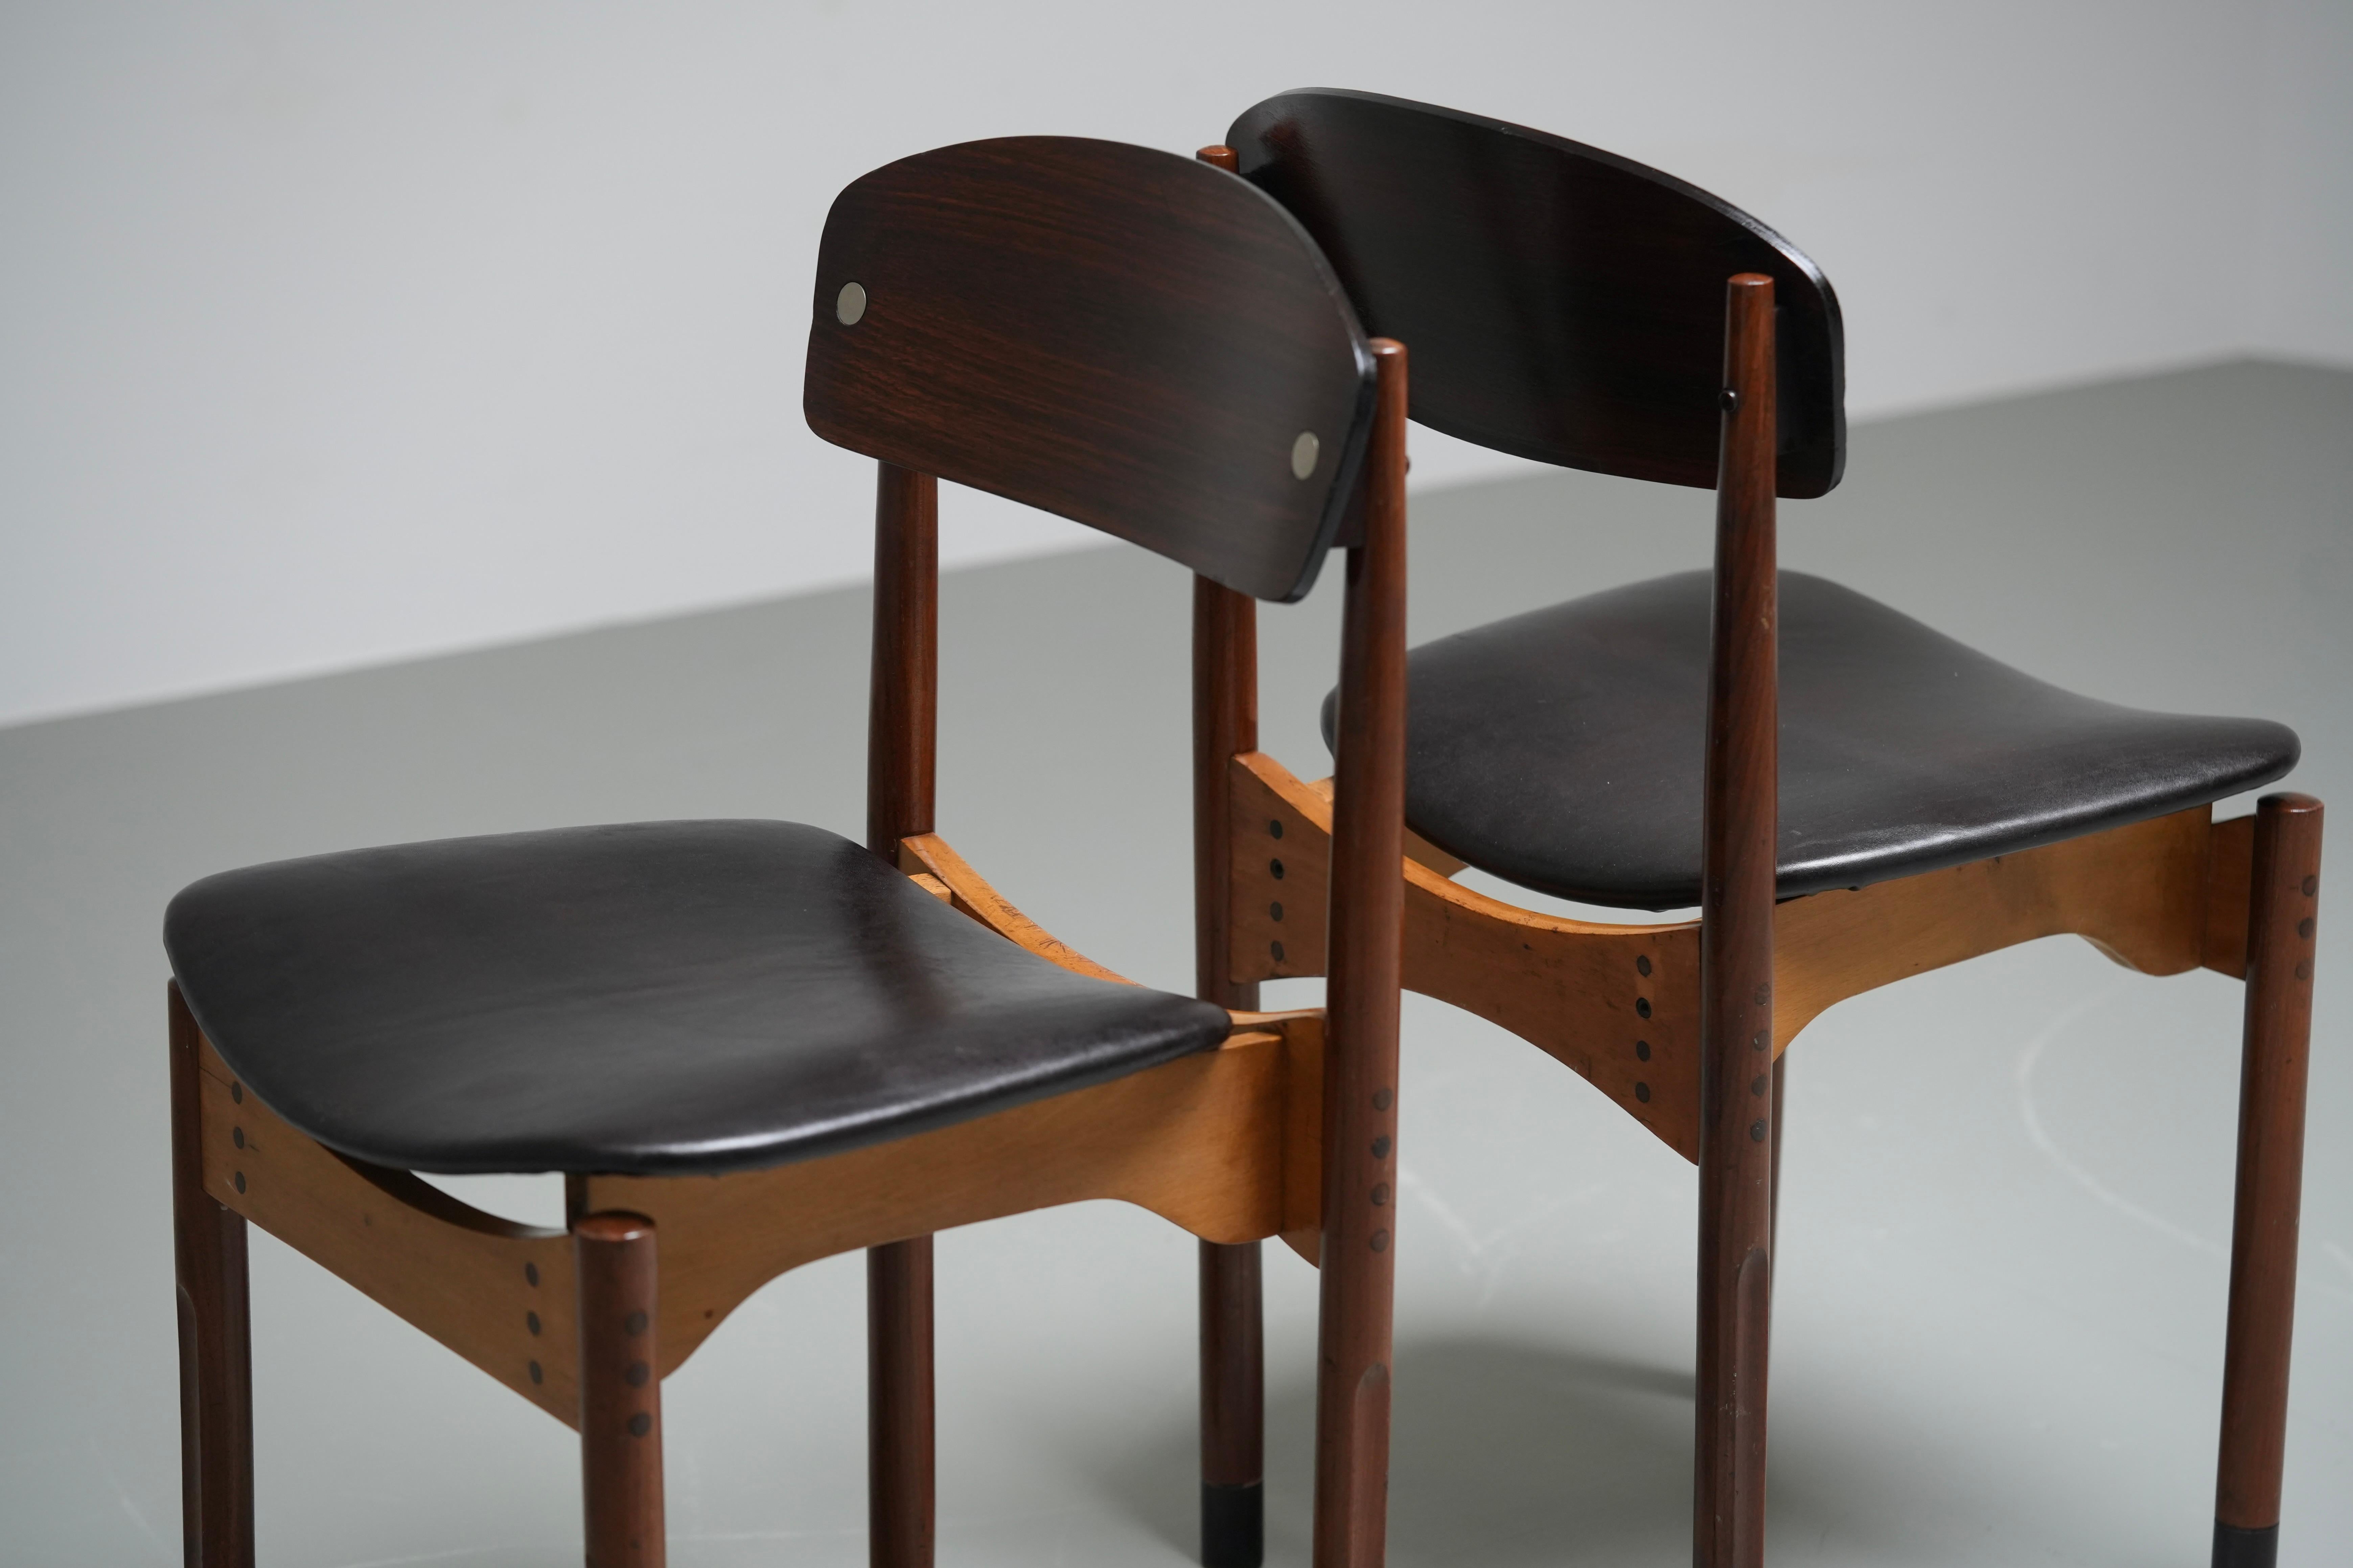 Set of 2 Diningroom Chairs in Teak, Mahogany and faux leather, Italty, 1960's For Sale 1